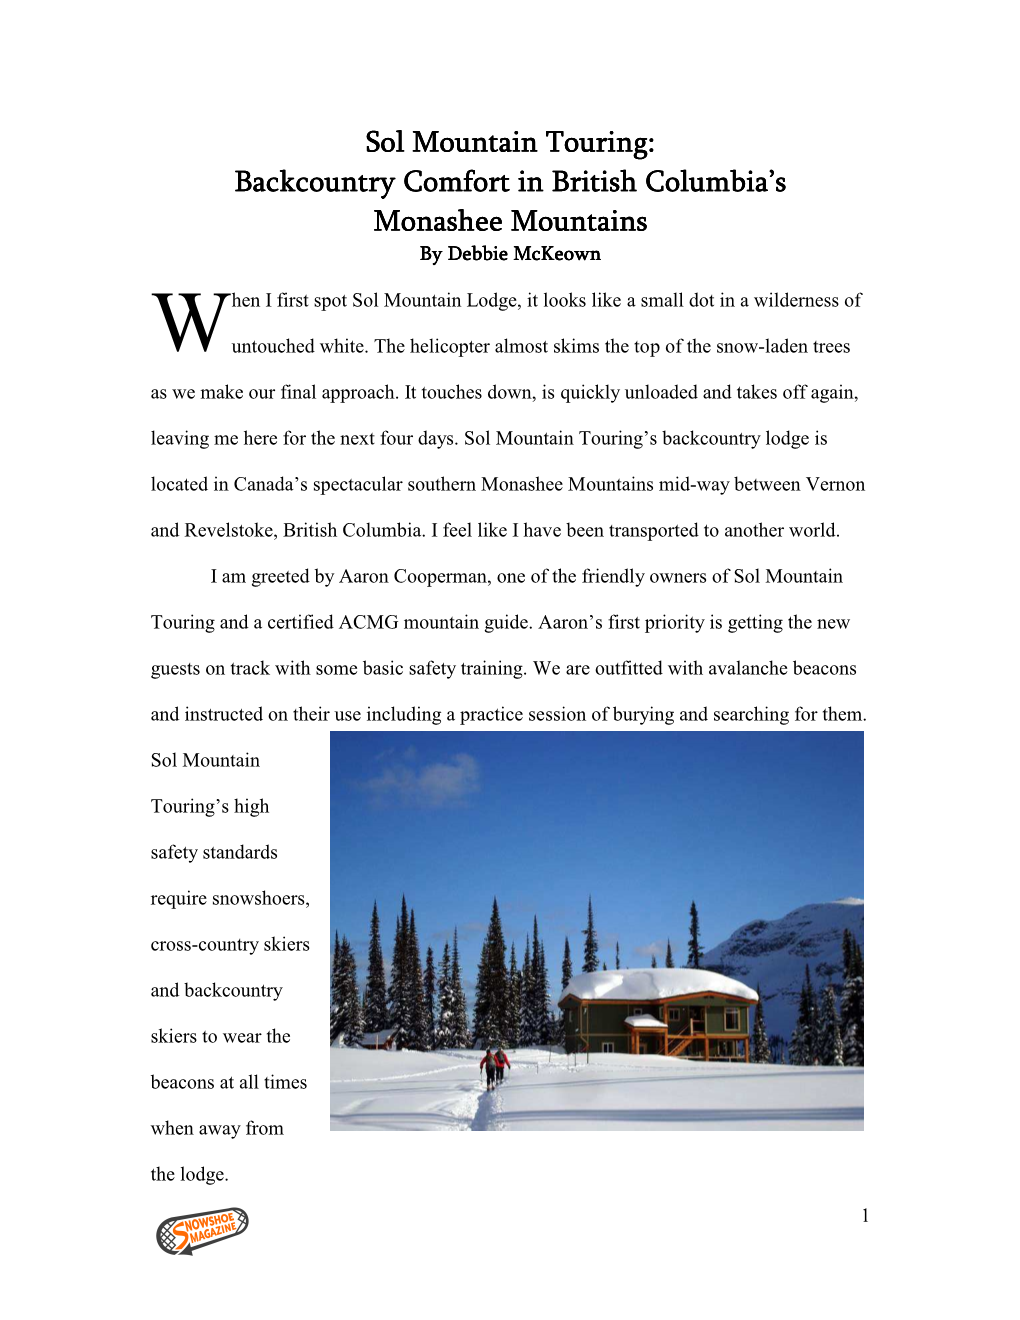 Sol Mountain Touring: Backcountry Comfort in British Columbia’S Monashee Mountains by Debbie Mckeown